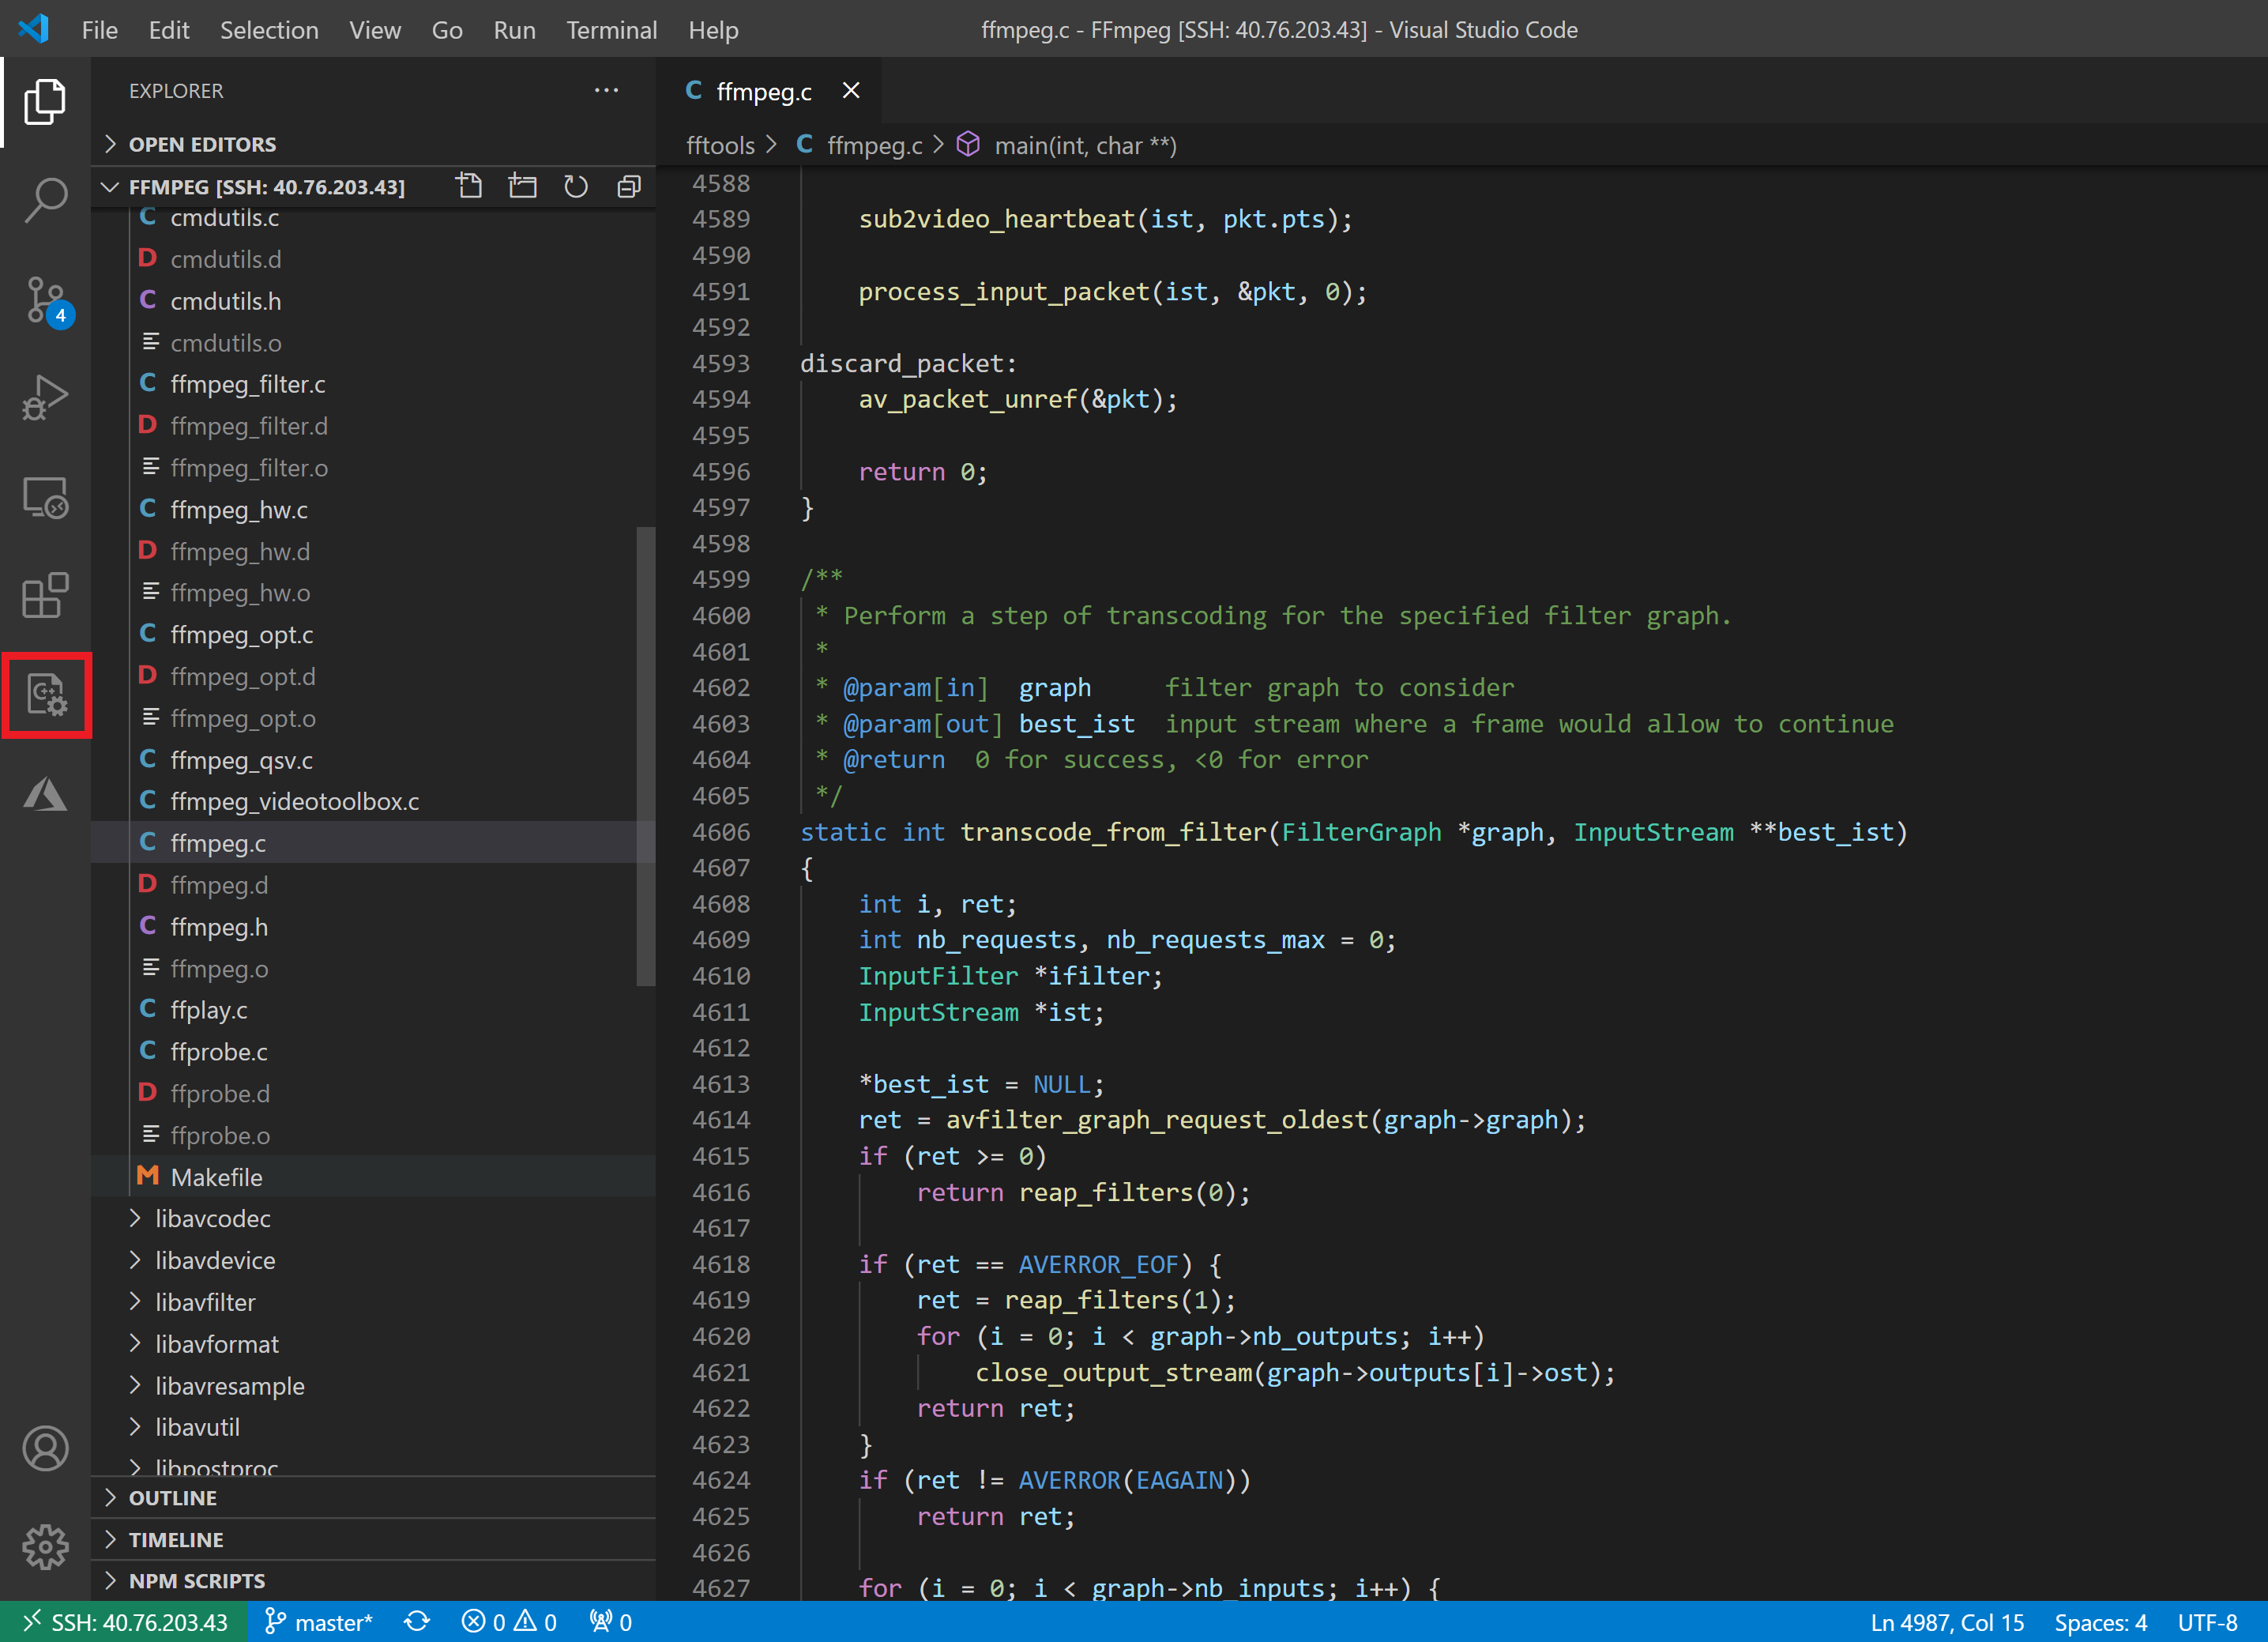 Now announcing: Makefile support in Visual Studio Code! - C++ Team Blog